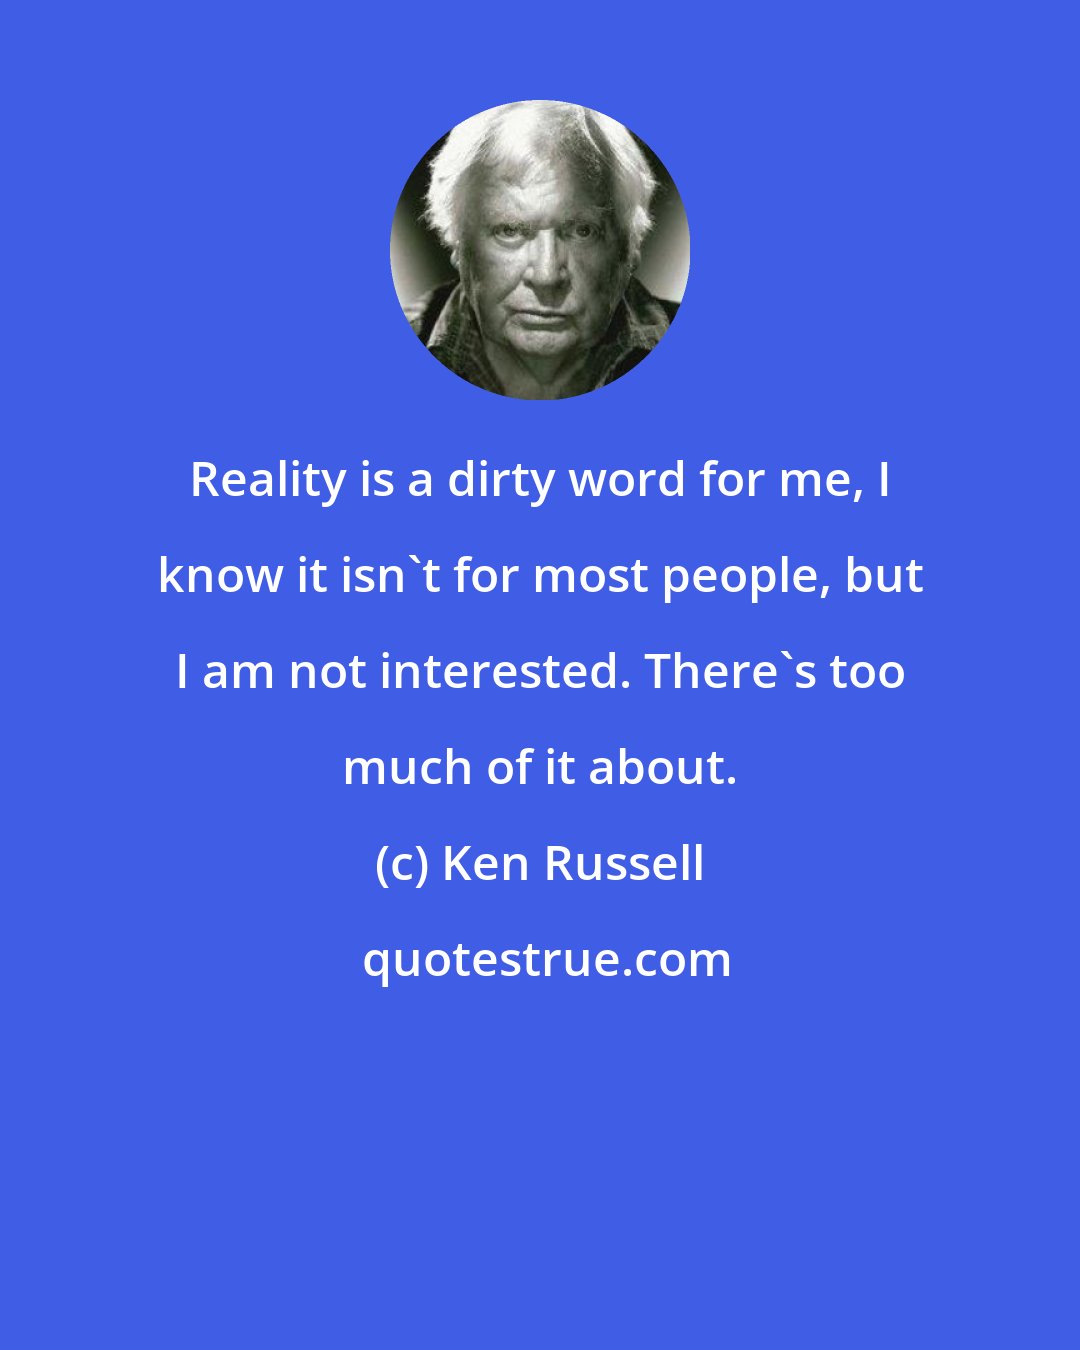 Ken Russell: Reality is a dirty word for me, I know it isn't for most people, but I am not interested. There's too much of it about.